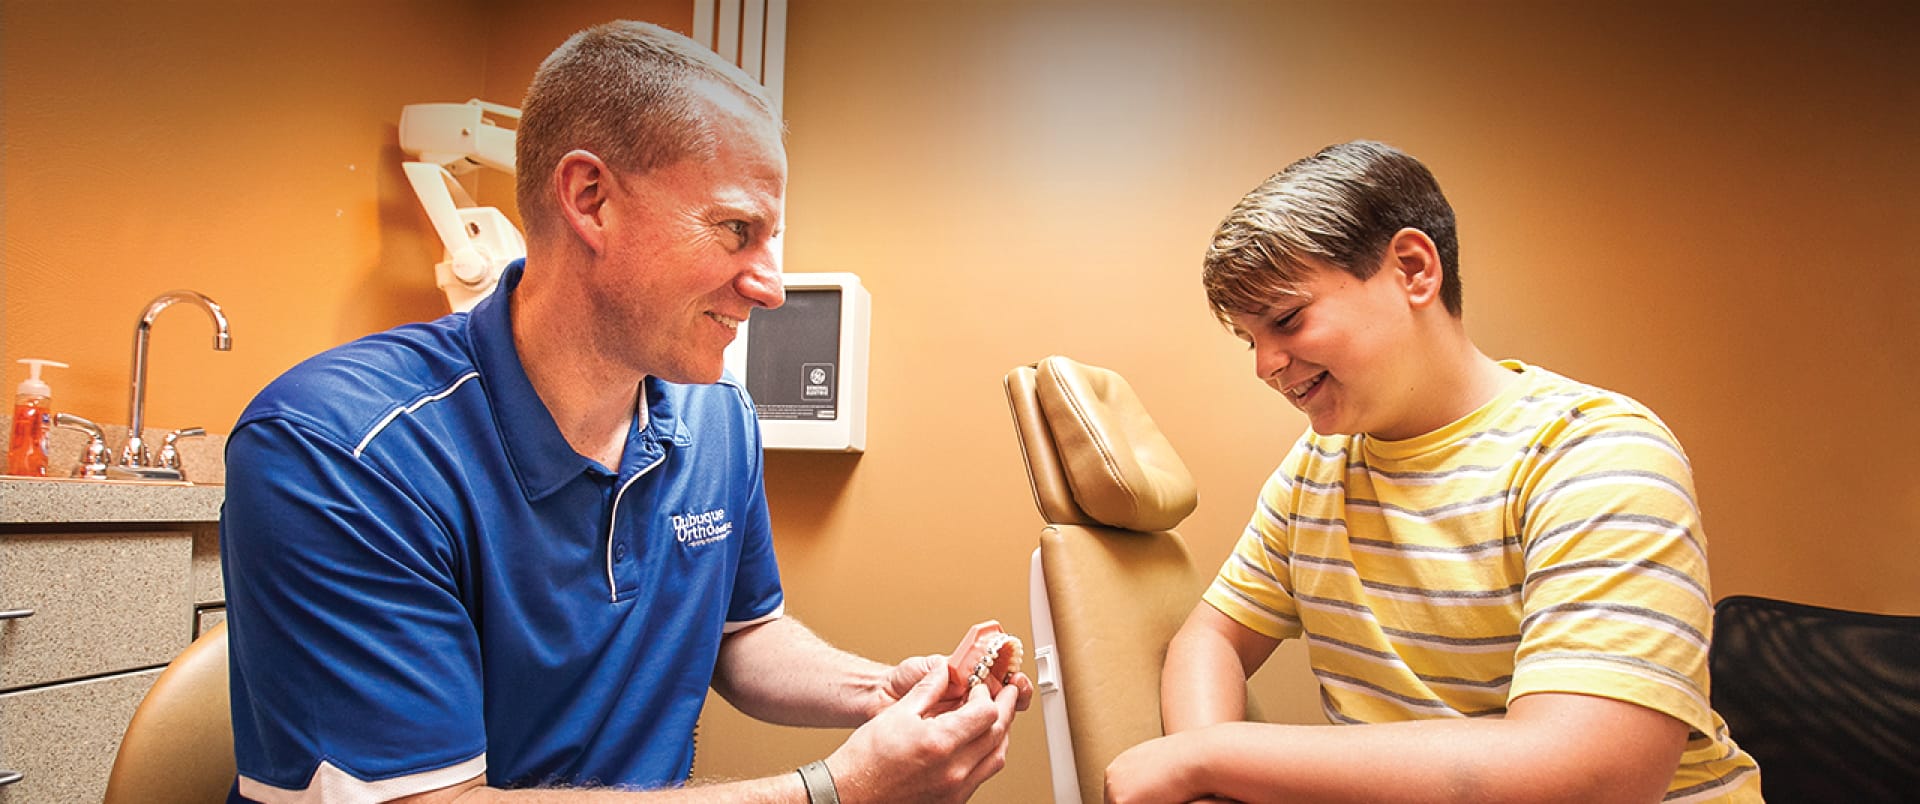 Dr. Morarend is an orthodontist at dubuque orthodontics